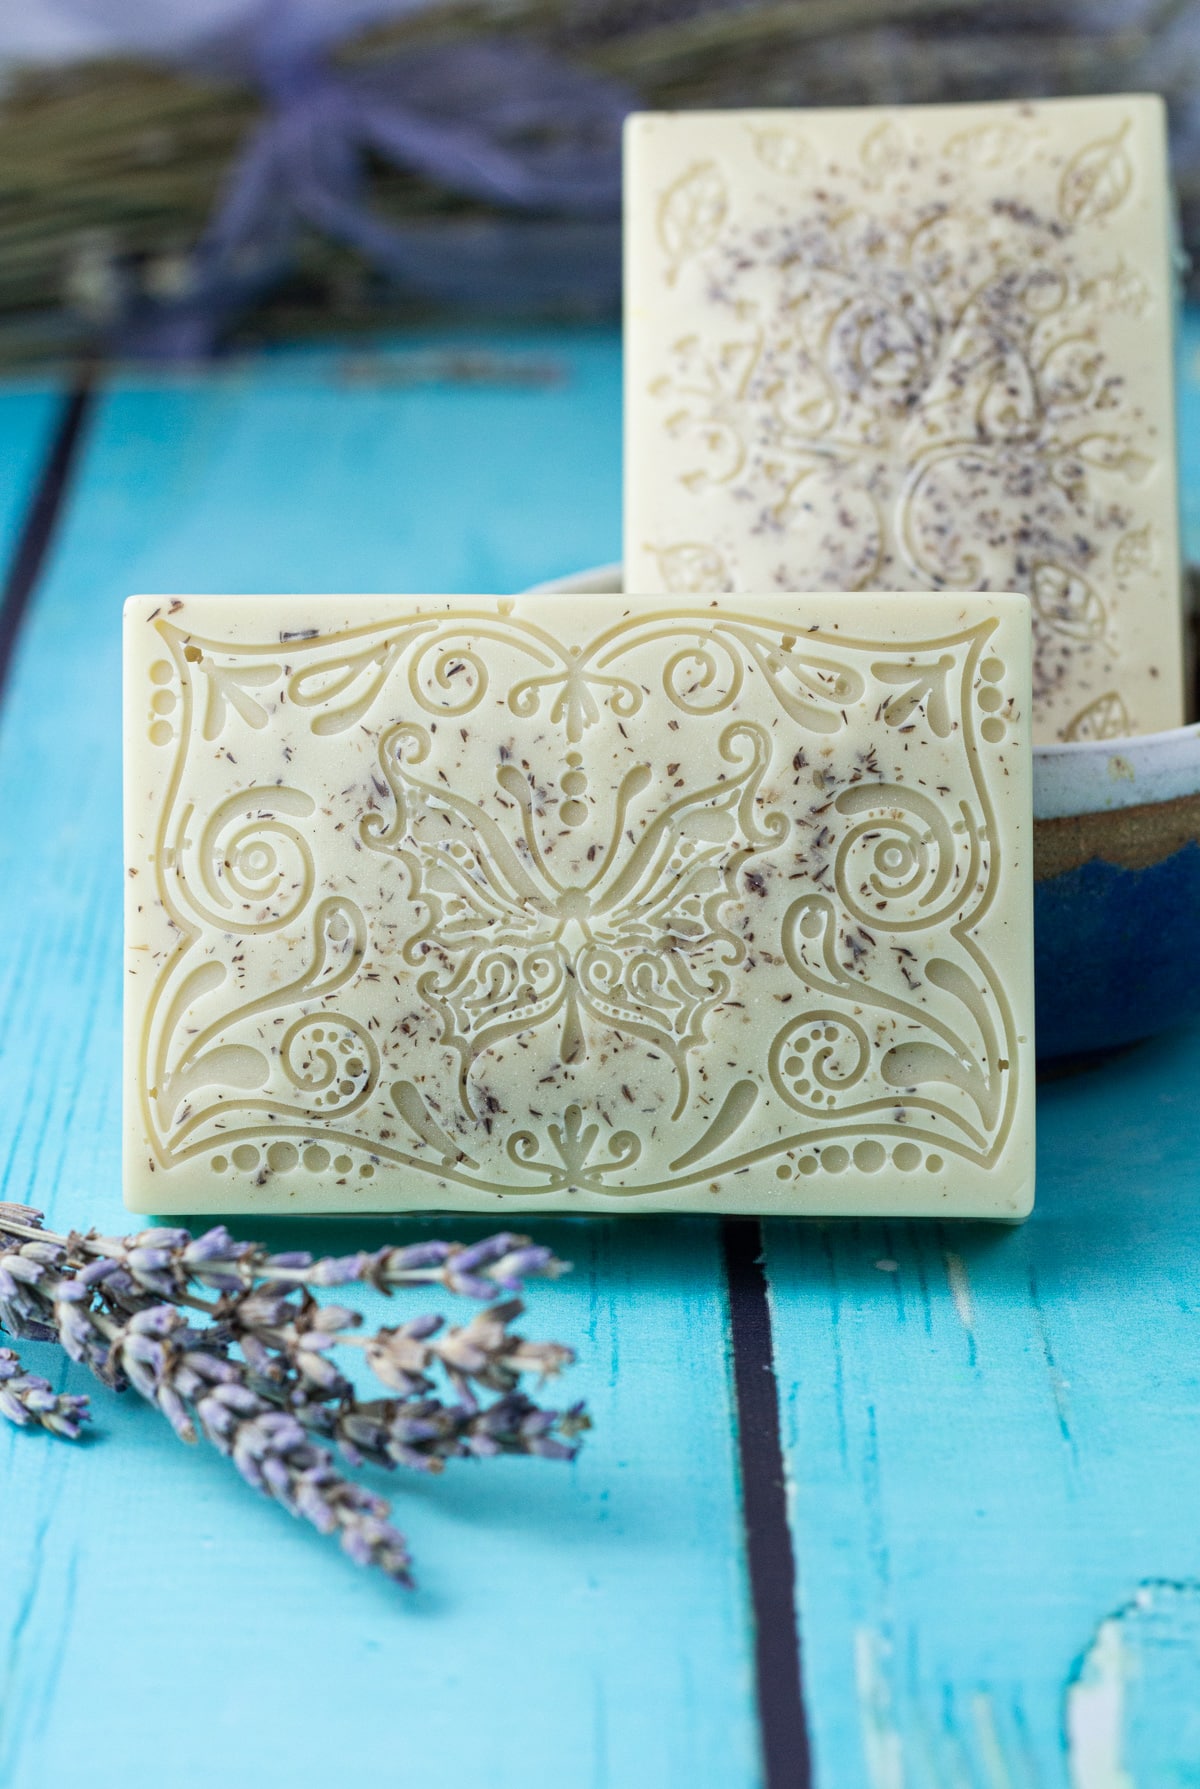 two lavender soap bars with floral design.